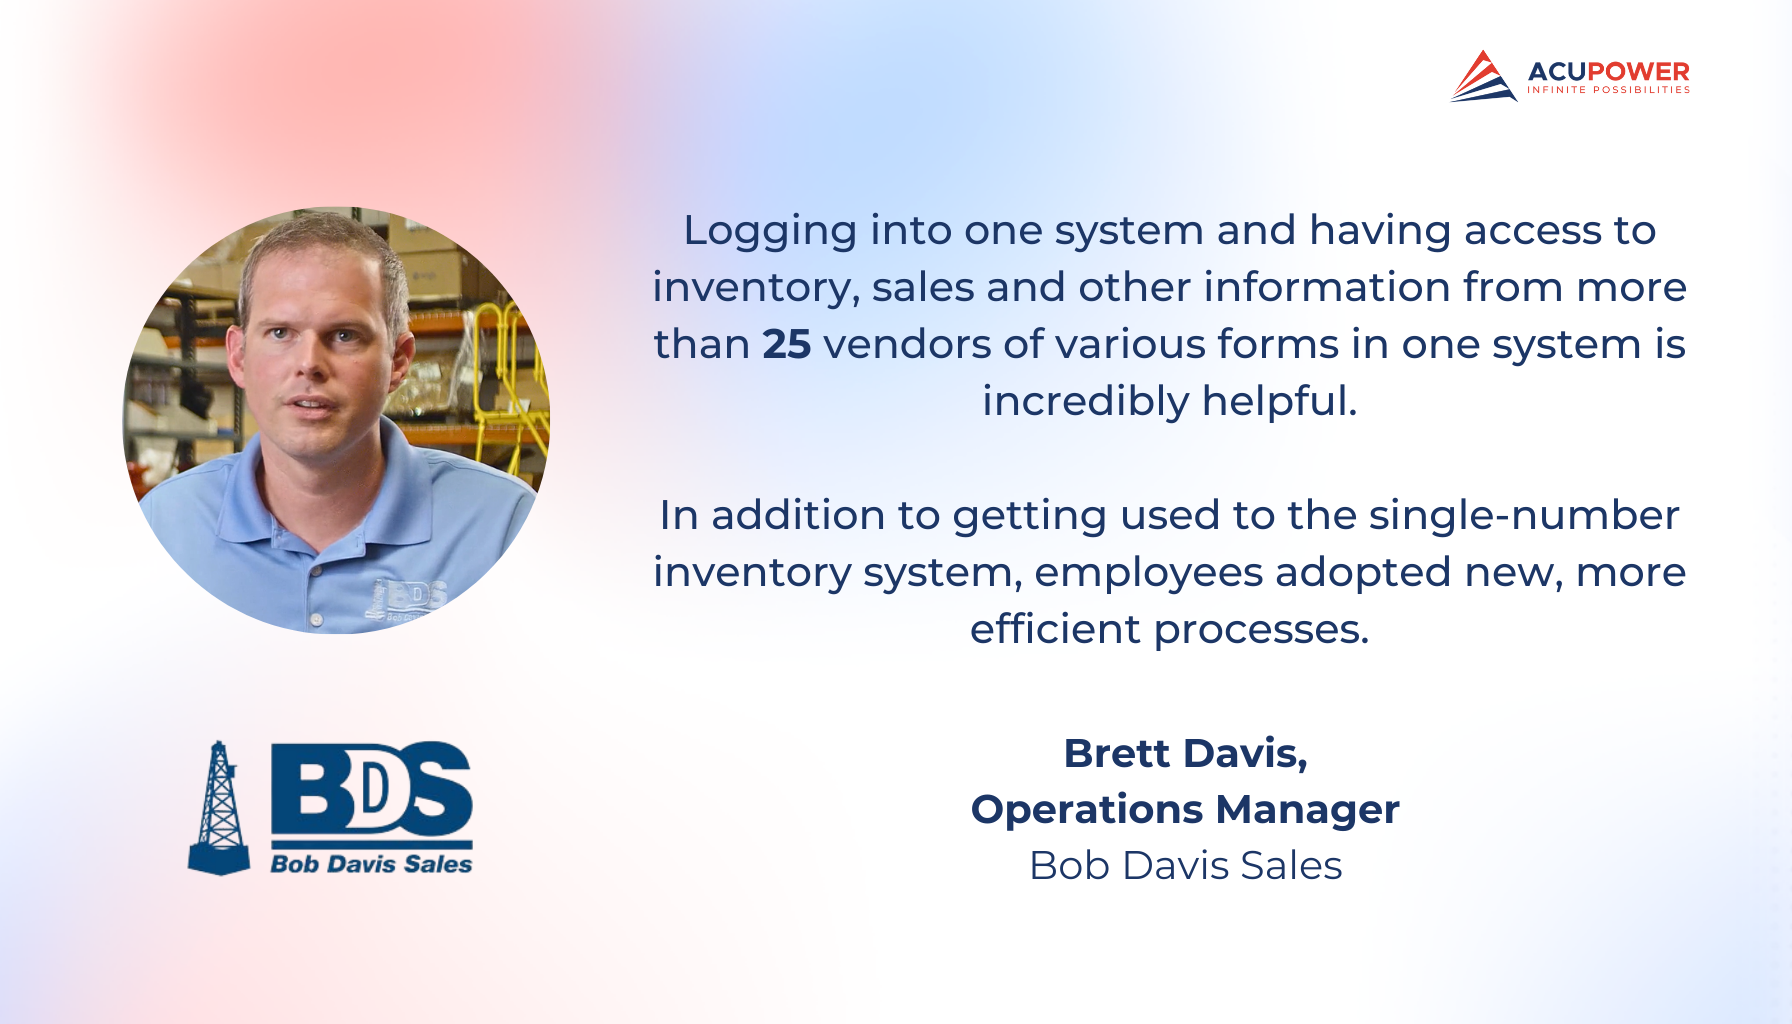 A quote of Brett Davis, Operations Manager of Bob Davis Sales. Logging into one system and having access to inventory, sales and other information from more than 25 vendors of various forms in one system is incredibly helpful. In addition to getting used to the single-number inventory system, employees adopted new, more efficient processes.